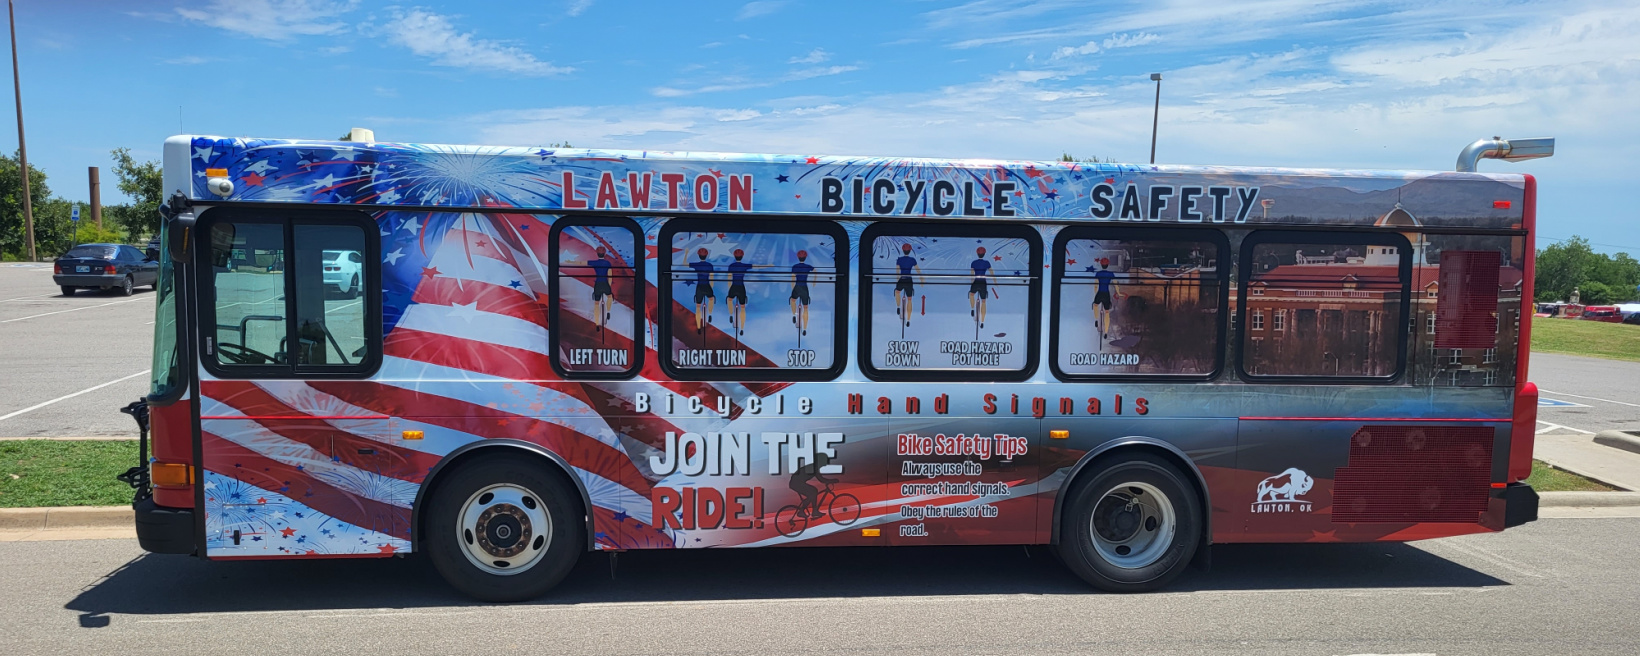 Patriotic Bus for the city of Lawton